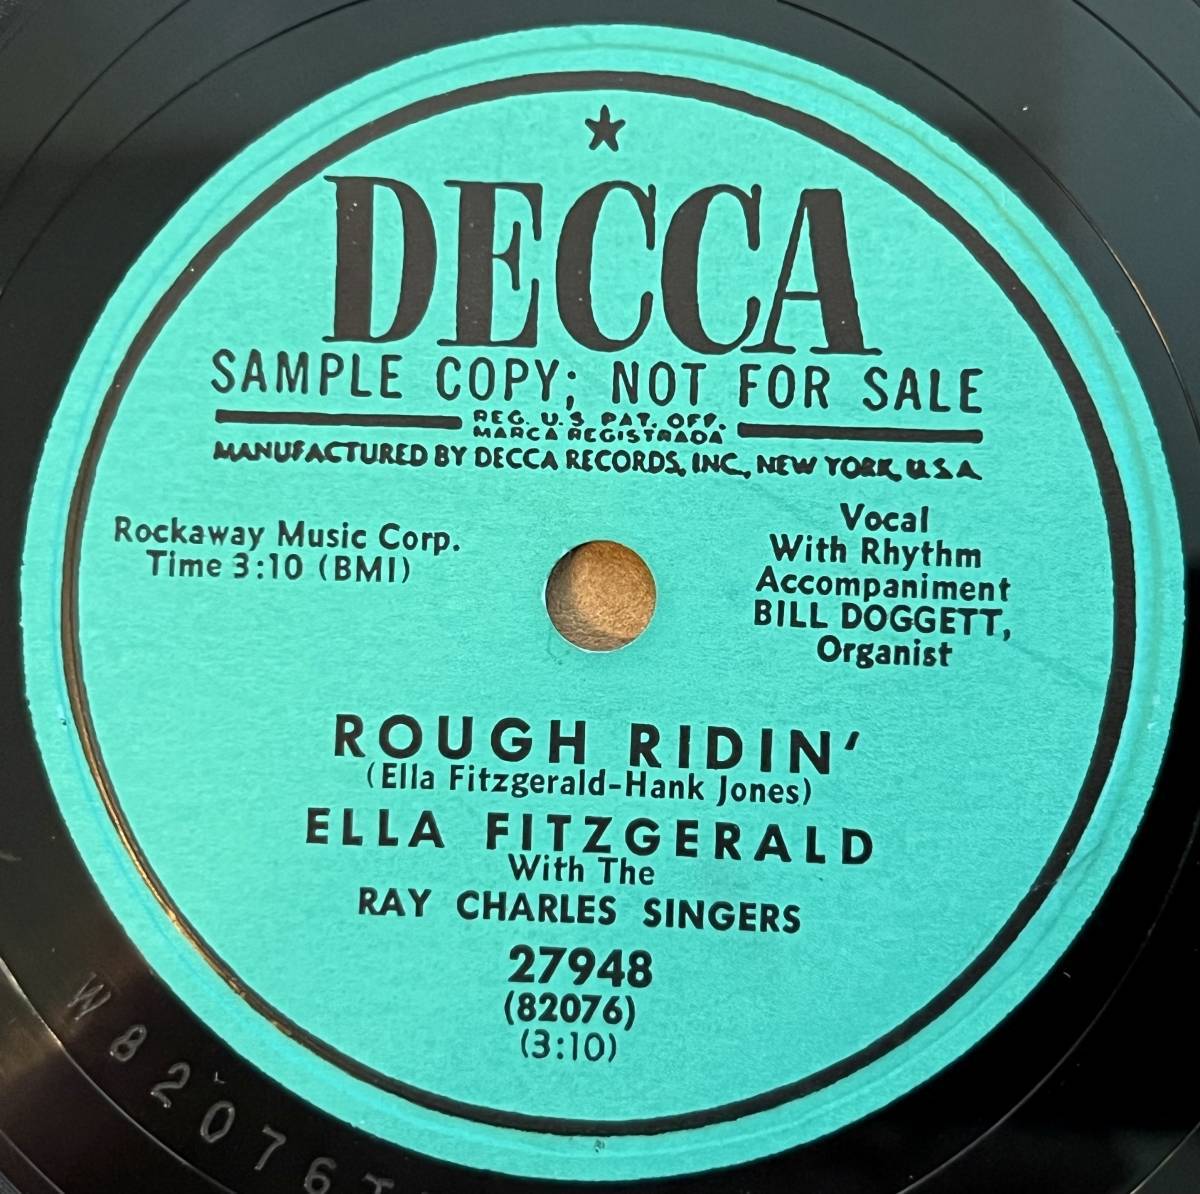 ELLA FITZGERALD DECCA I Don't Want To Take A Chance/ (with The Ray Charles Singers) Rough Ridin’ の画像2